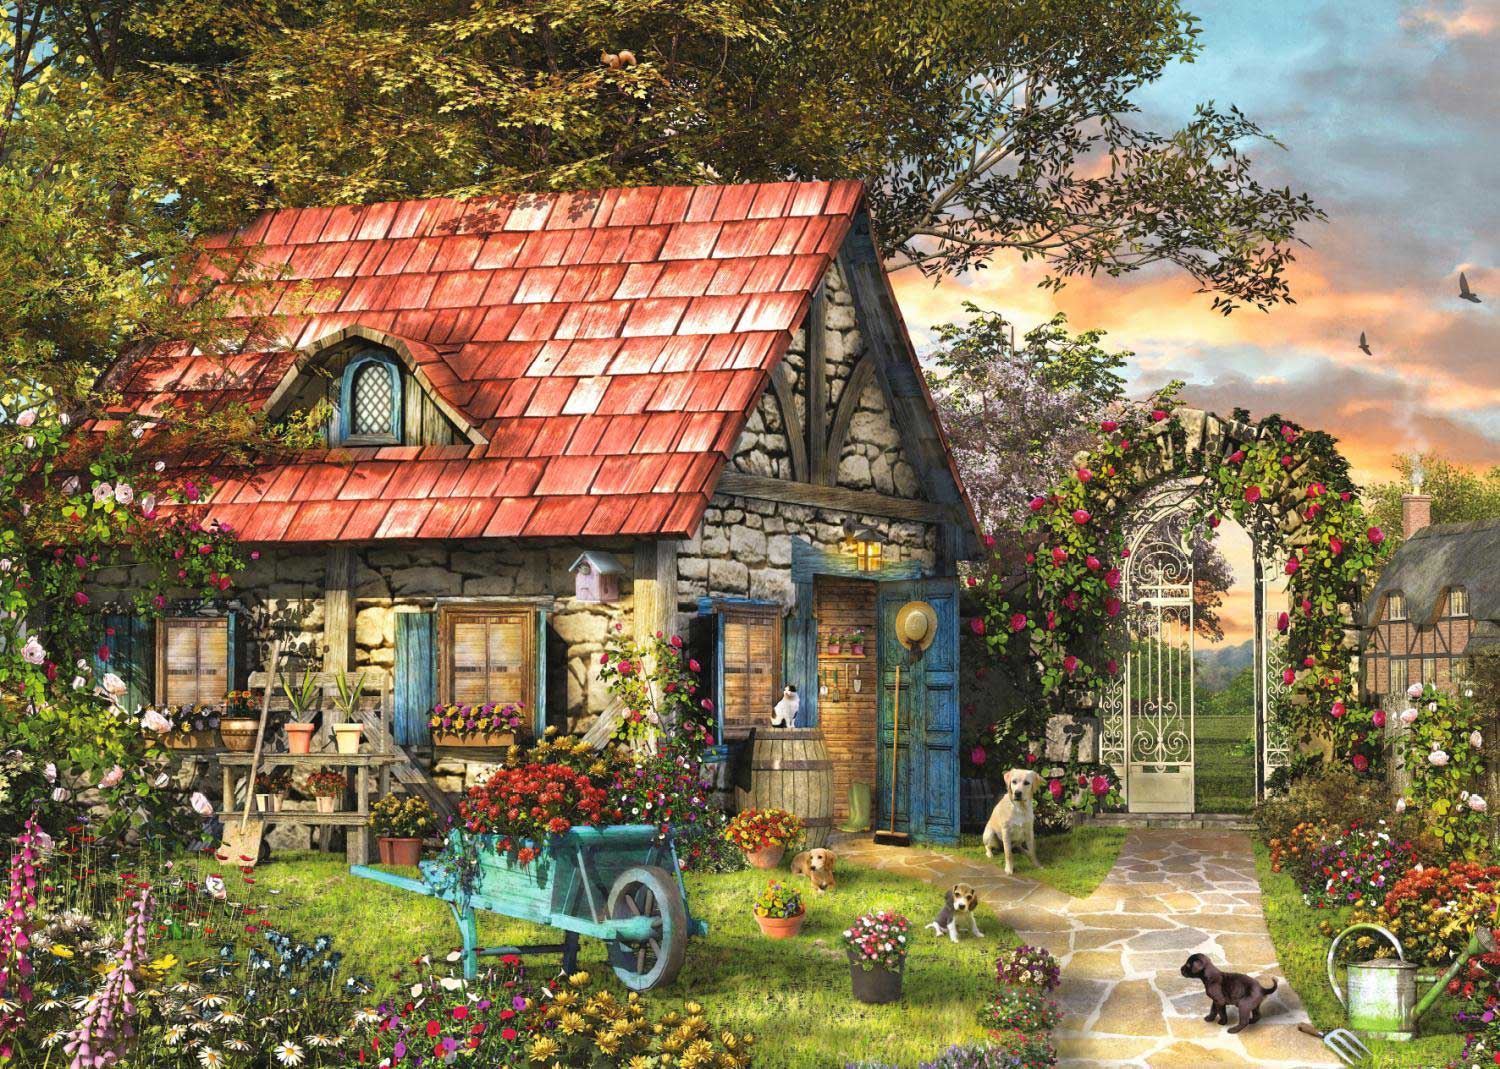 GARDEN SHED EXTRA LARGE PIECE JIGSAW PUZZLE (JUM18529)